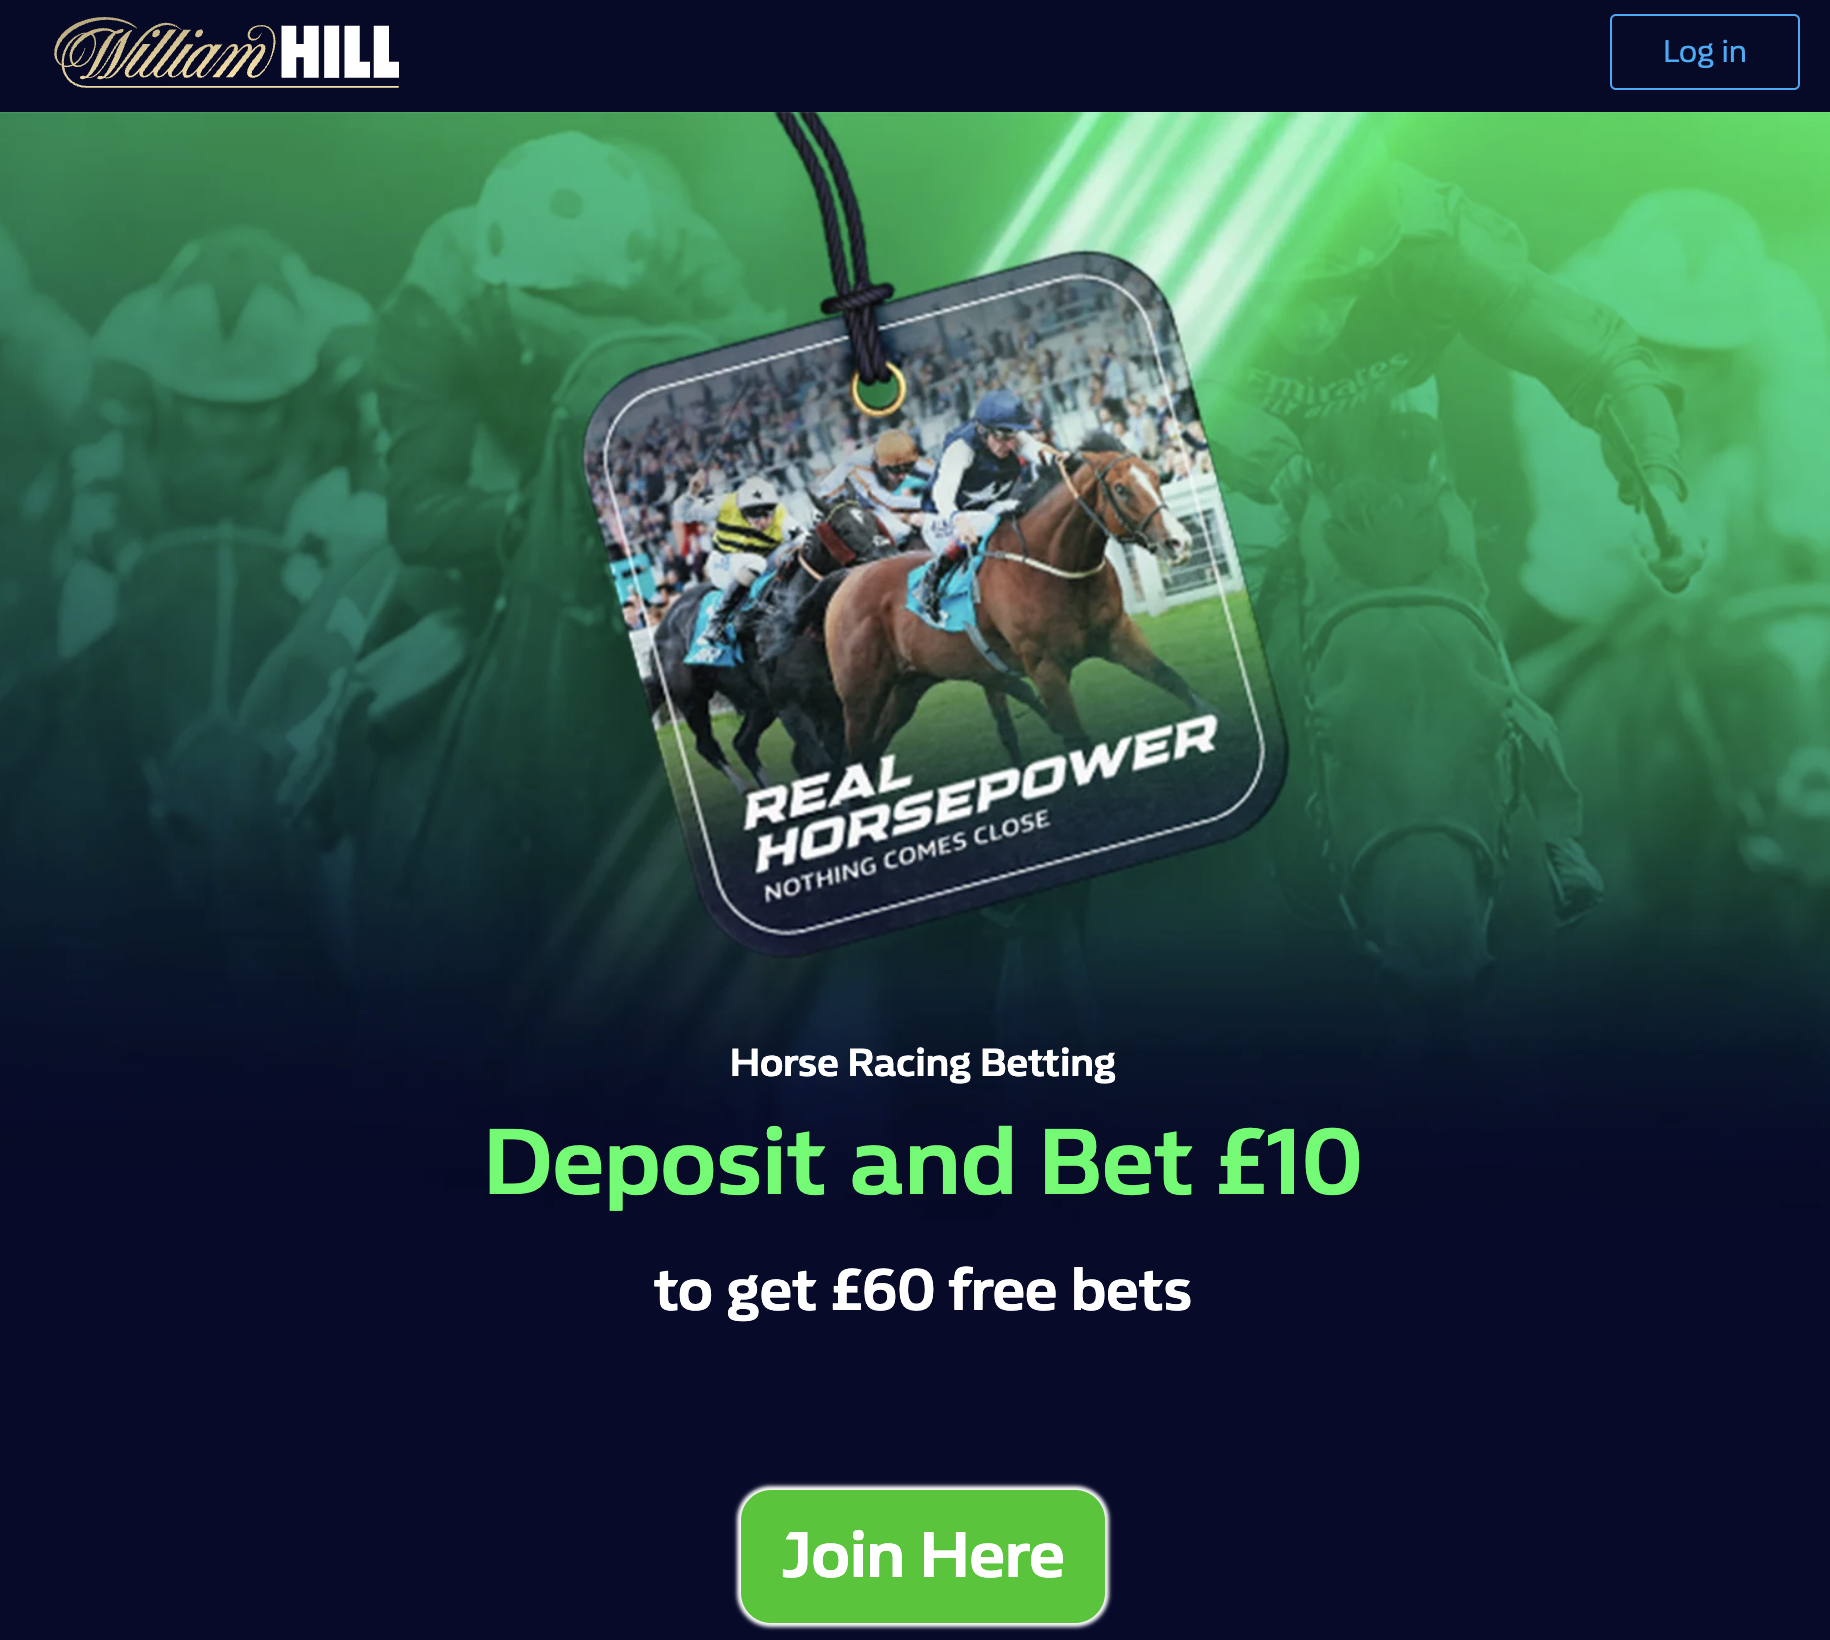 William hill royal ascot free bets